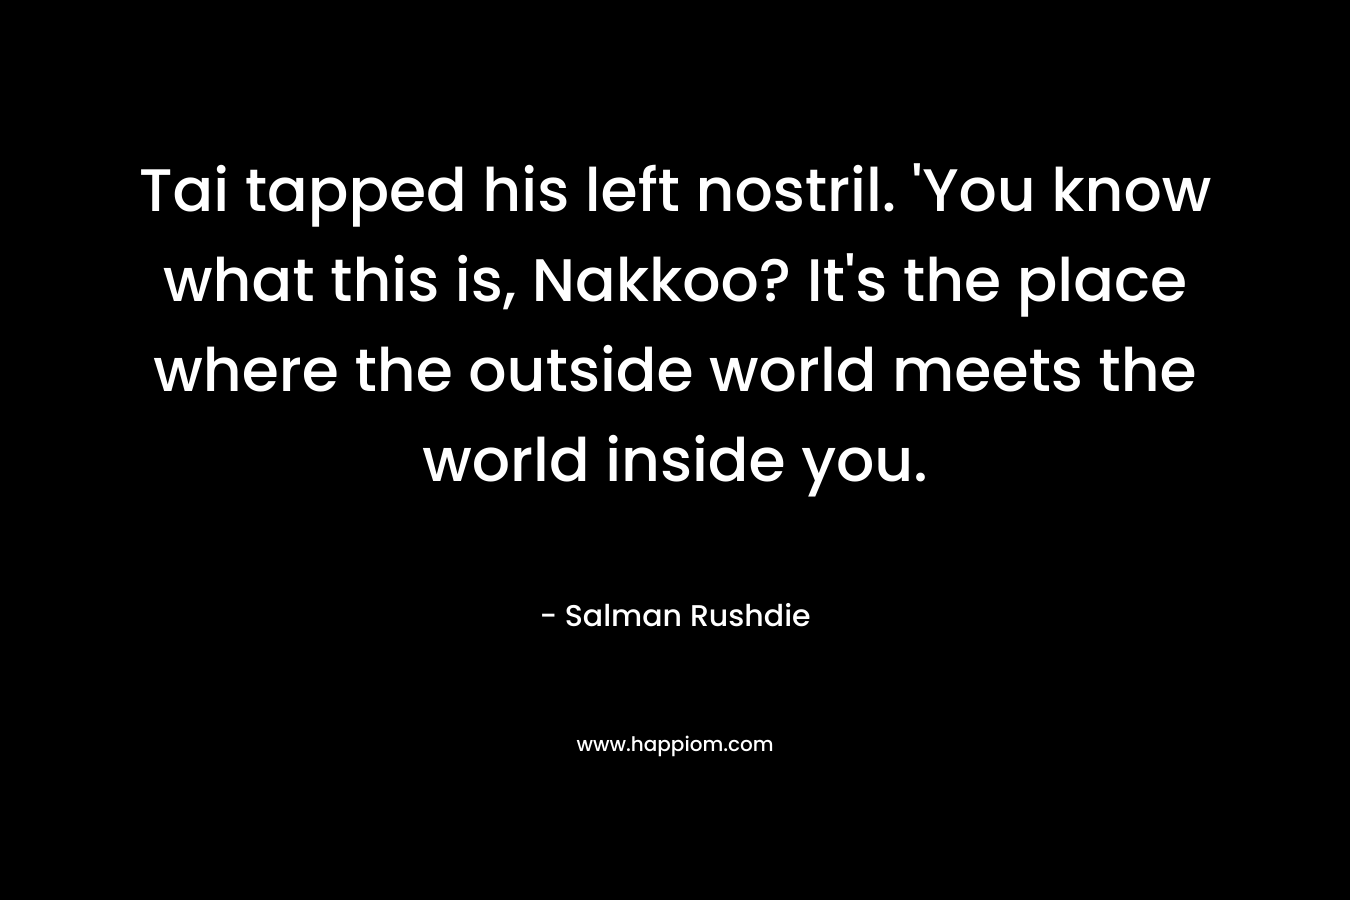 Tai tapped his left nostril. ‘You know what this is, Nakkoo? It’s the place where the outside world meets the world inside you. – Salman Rushdie